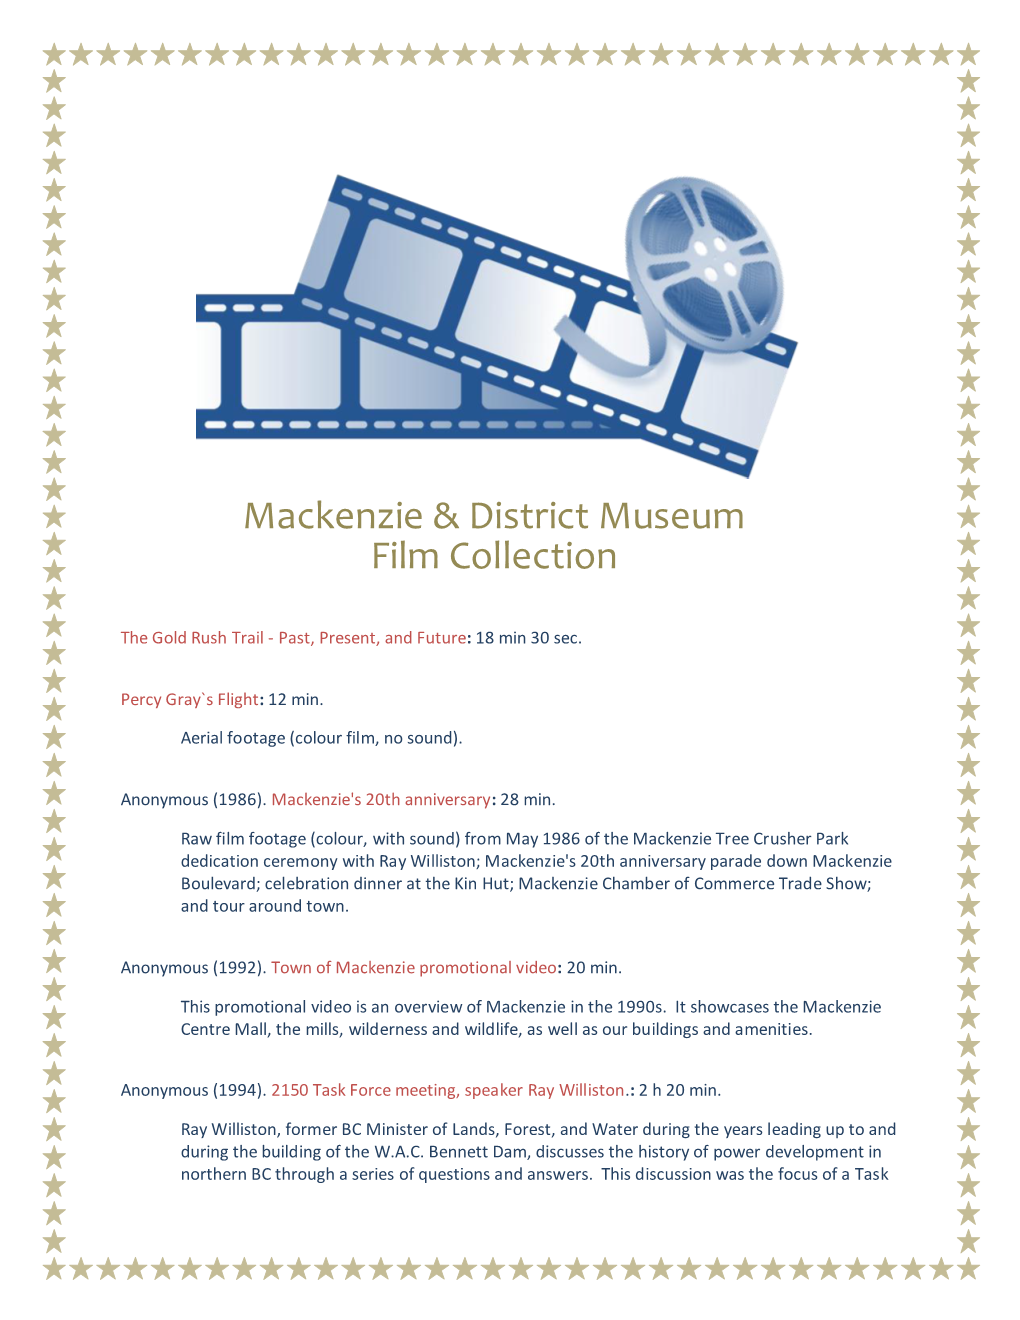 Mackenzie & District Museum Film Collection